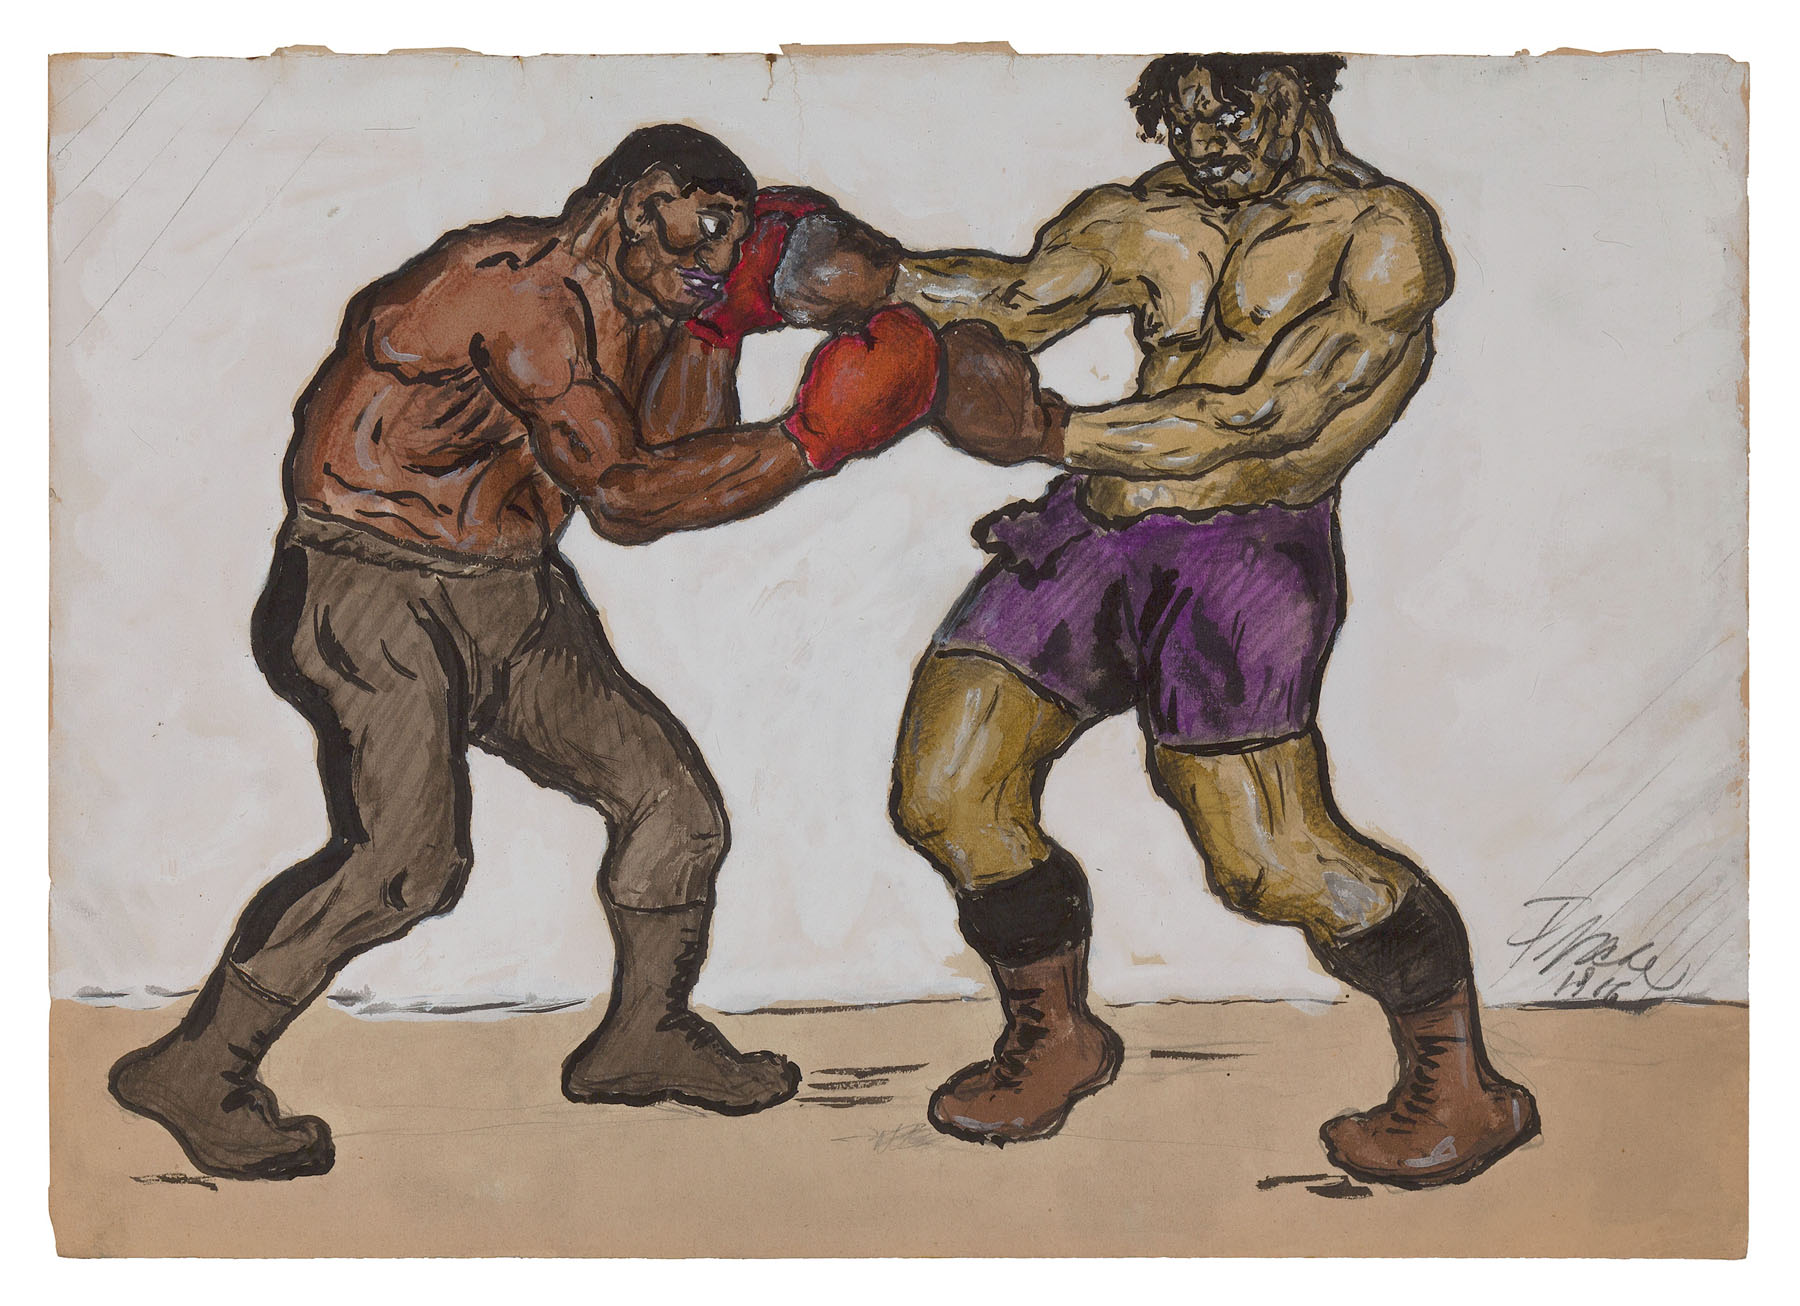 Two Men Boxing, 1916. White gouache, watercolour, black ink and graphite on paper, 12.2 x 17.1 in. (31 x 43.5 cm). Private collection. Photo Malcolm Varon ©Bianca Stock